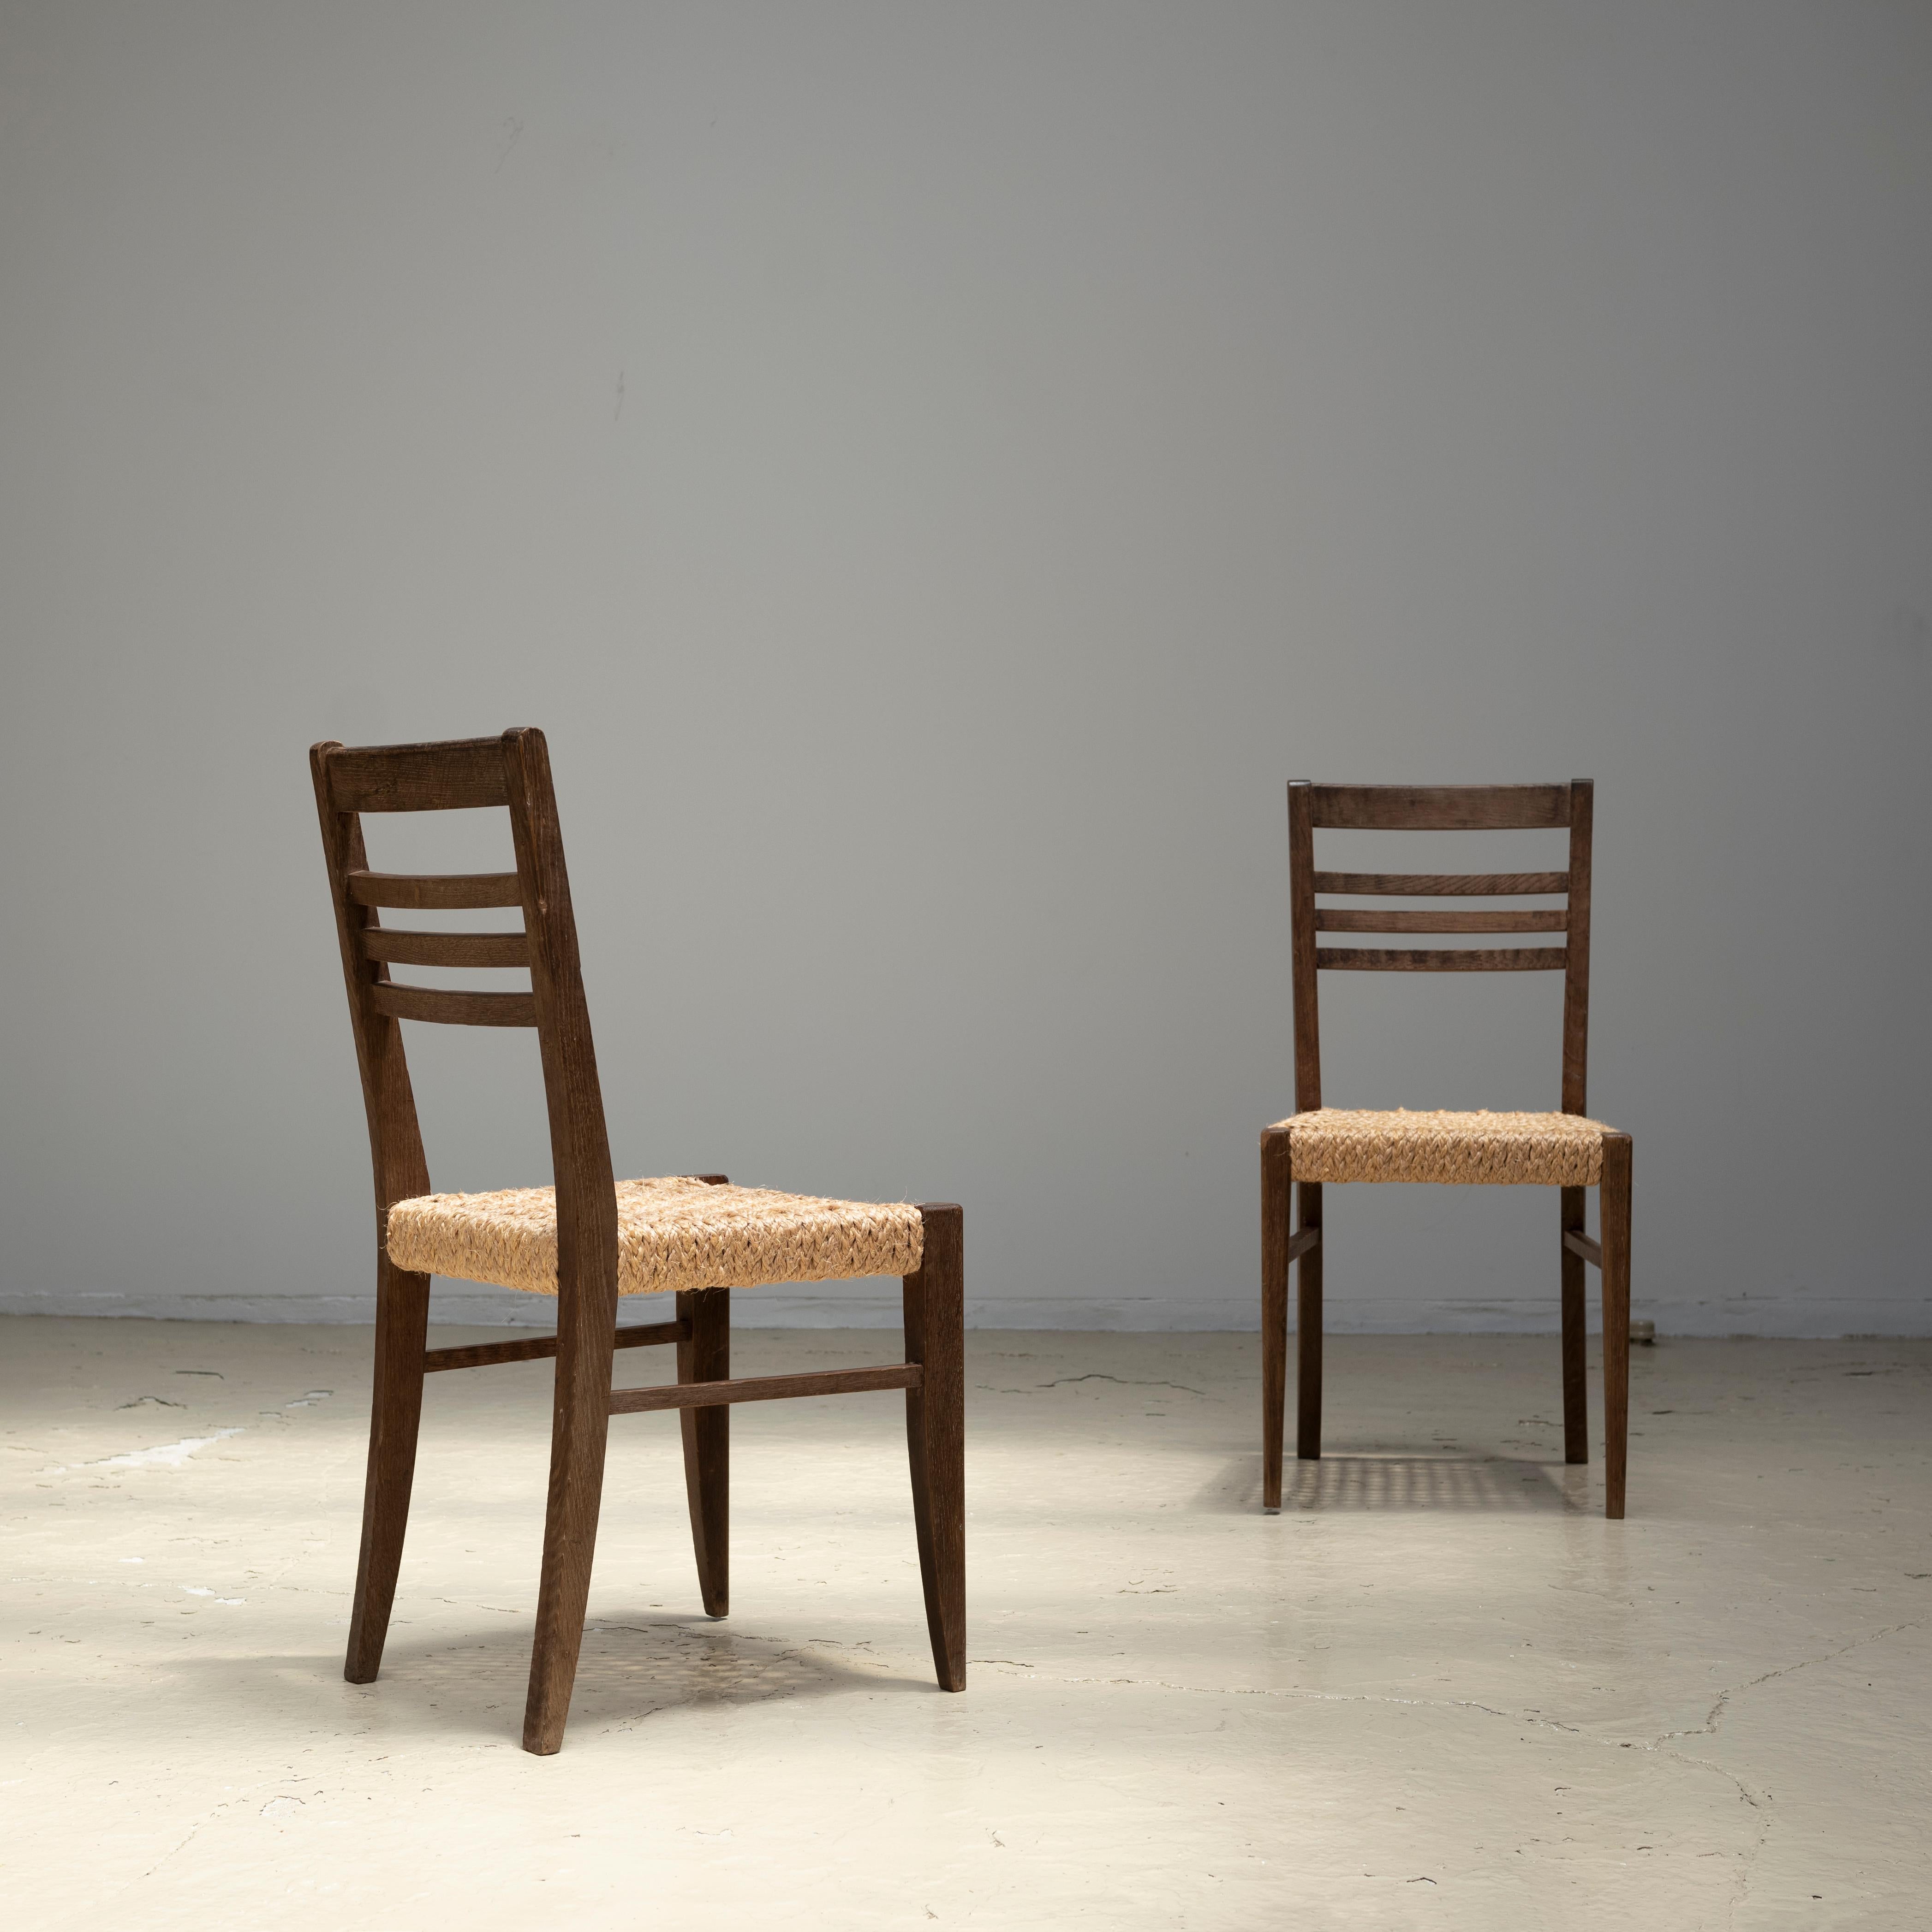 A set of two dining chairs designed by Adrien Audoux and Frida Minet in 1950s.
Composed of an oak wood structure and a woven rope seat.
Sold as a pair.